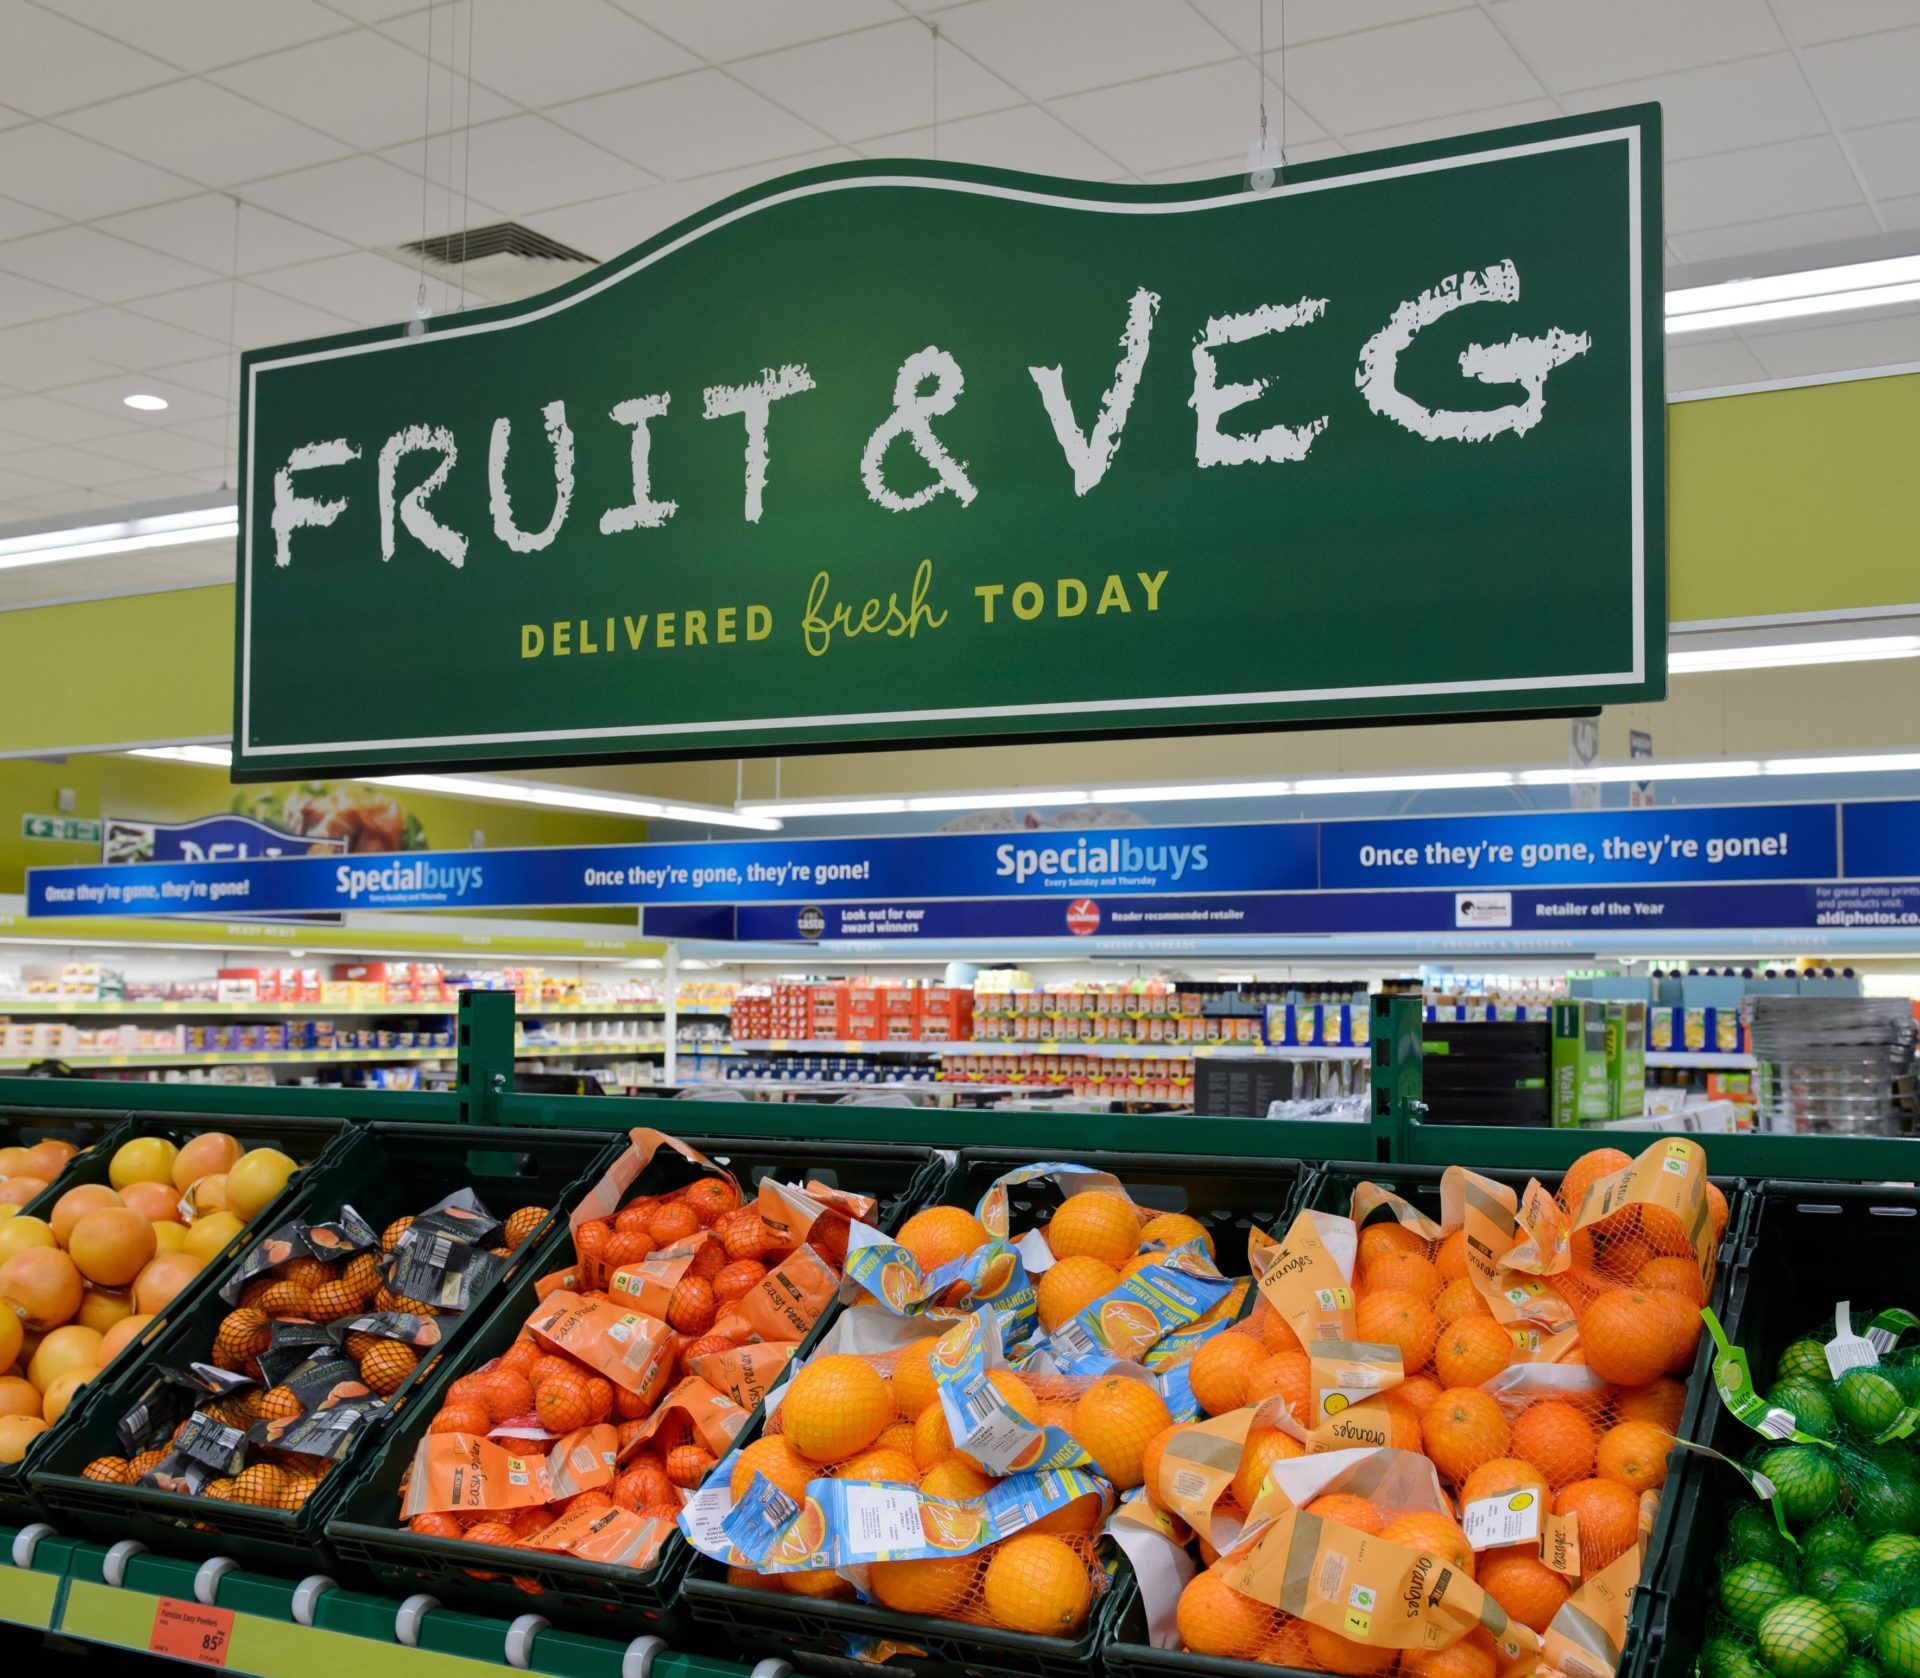 Fresh Fruit and Veg display in a supermarket in September 2014.